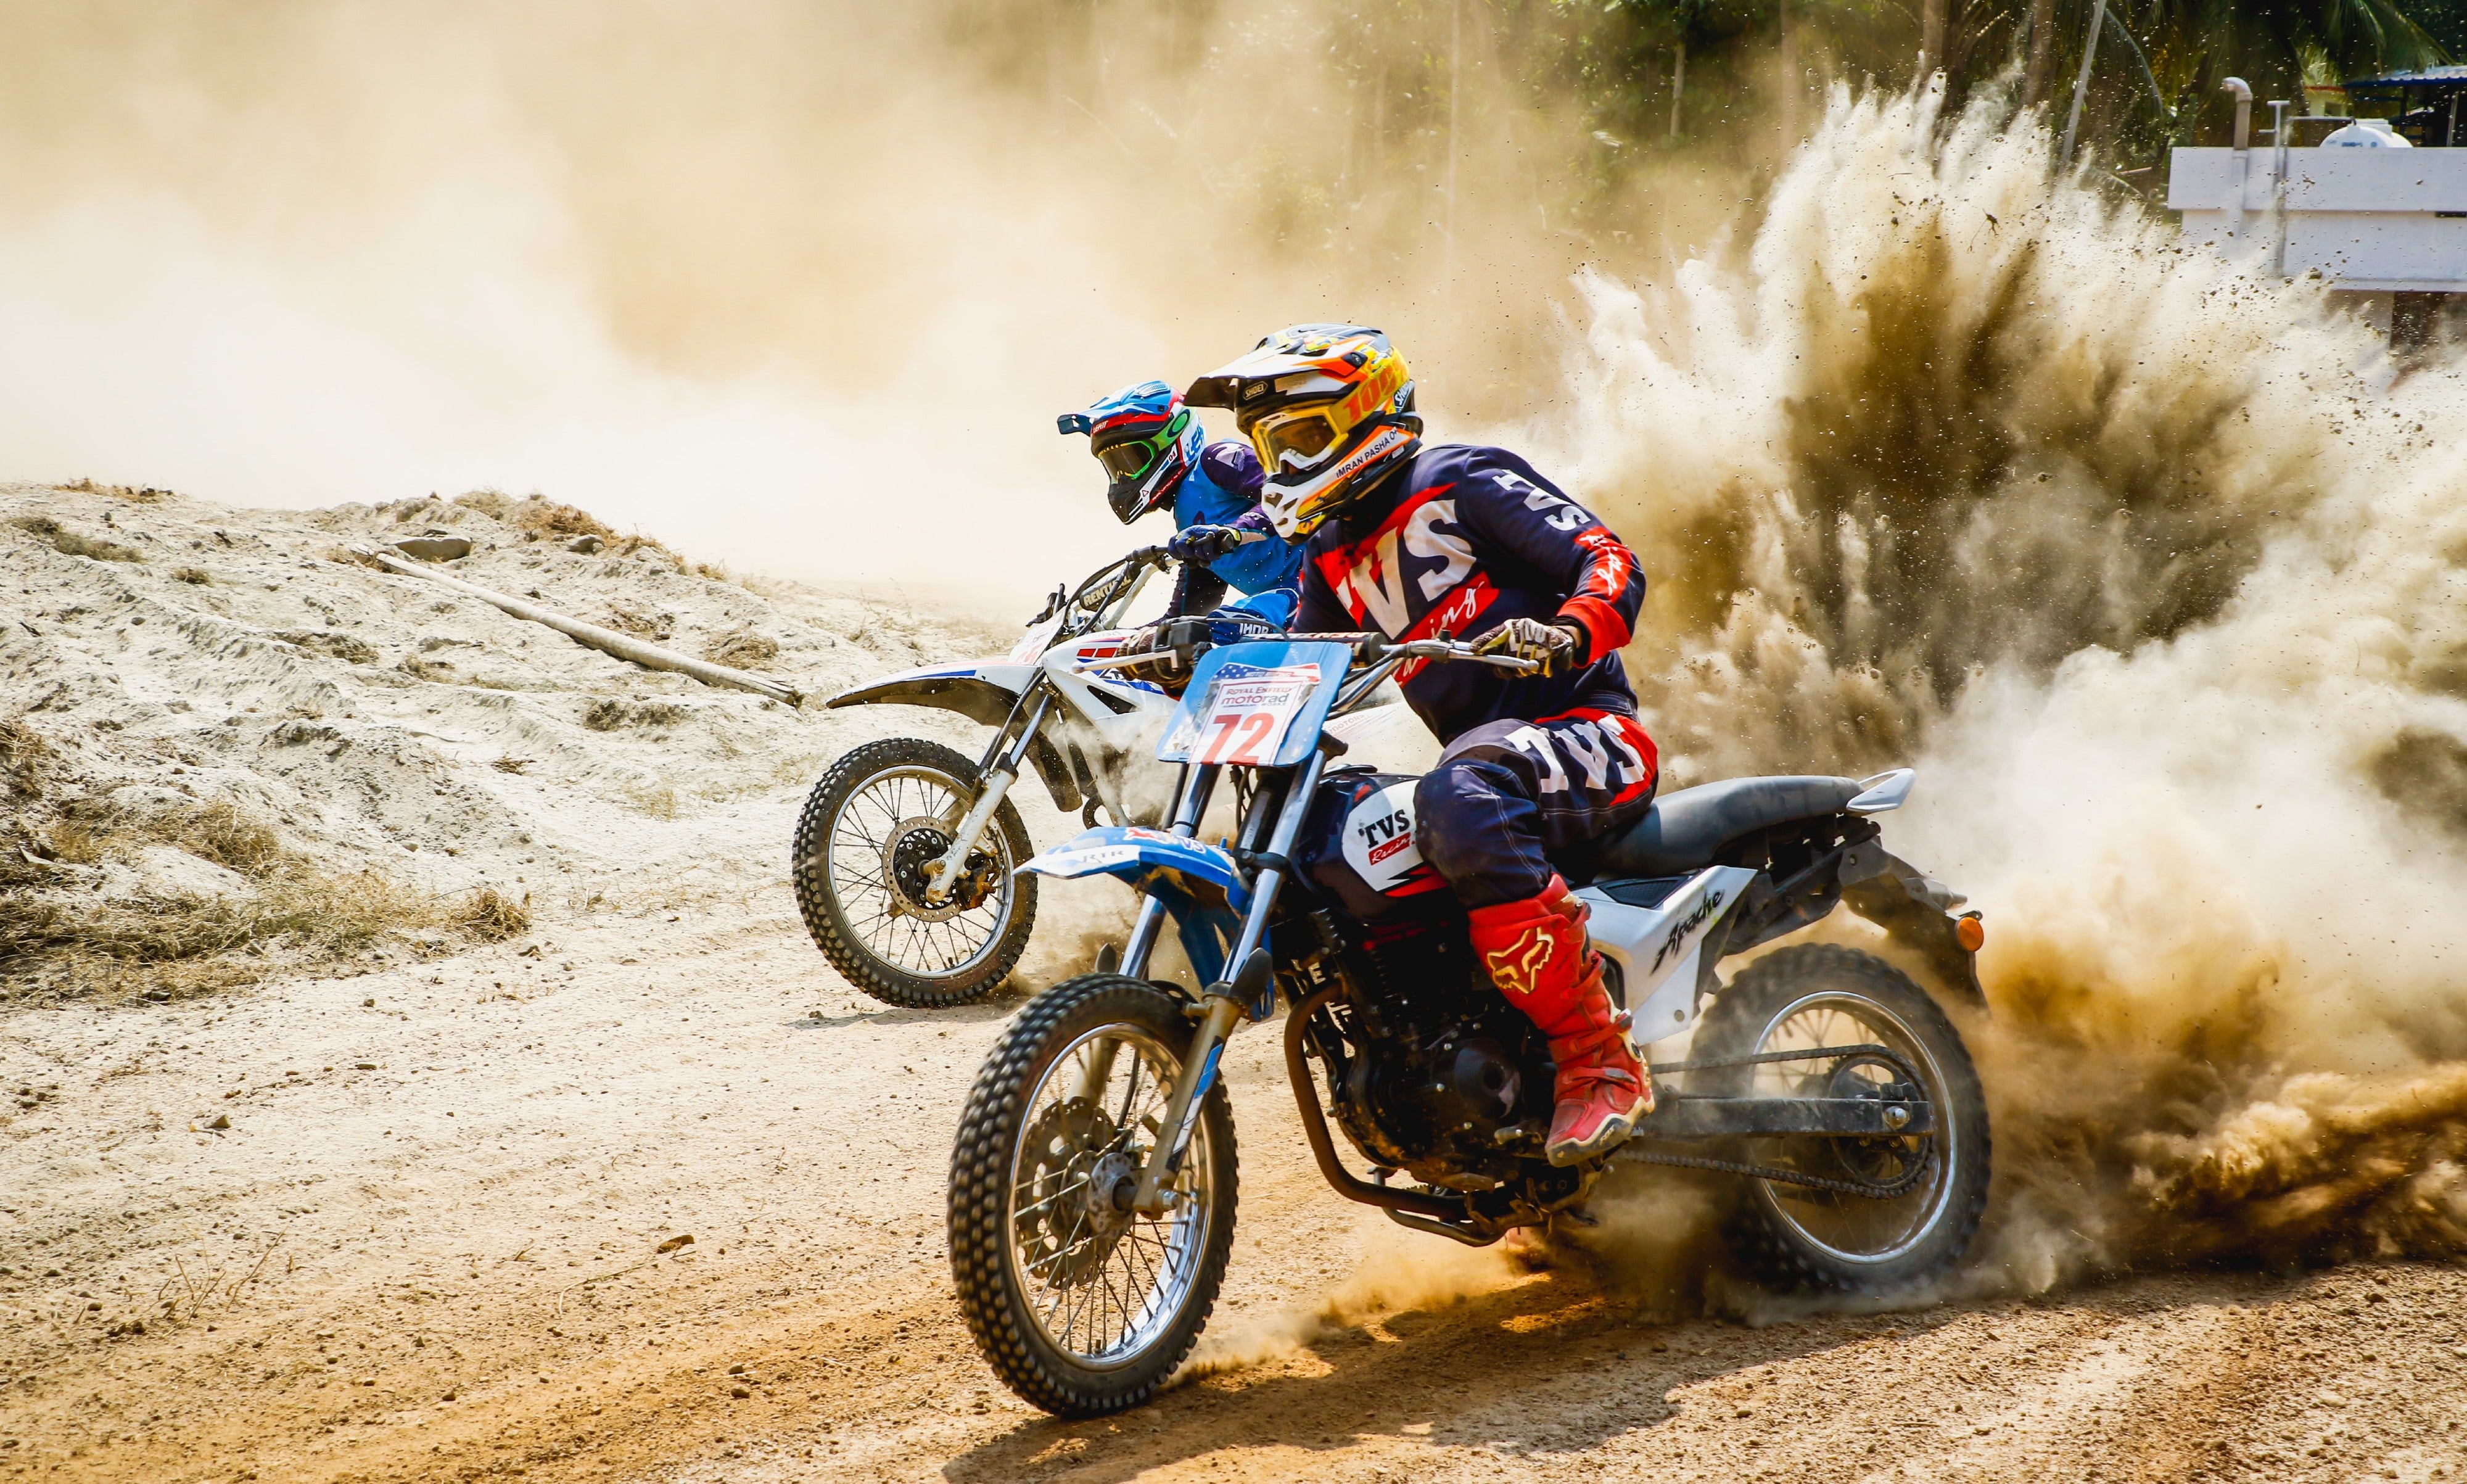 shutter speed in high-speed sports photography